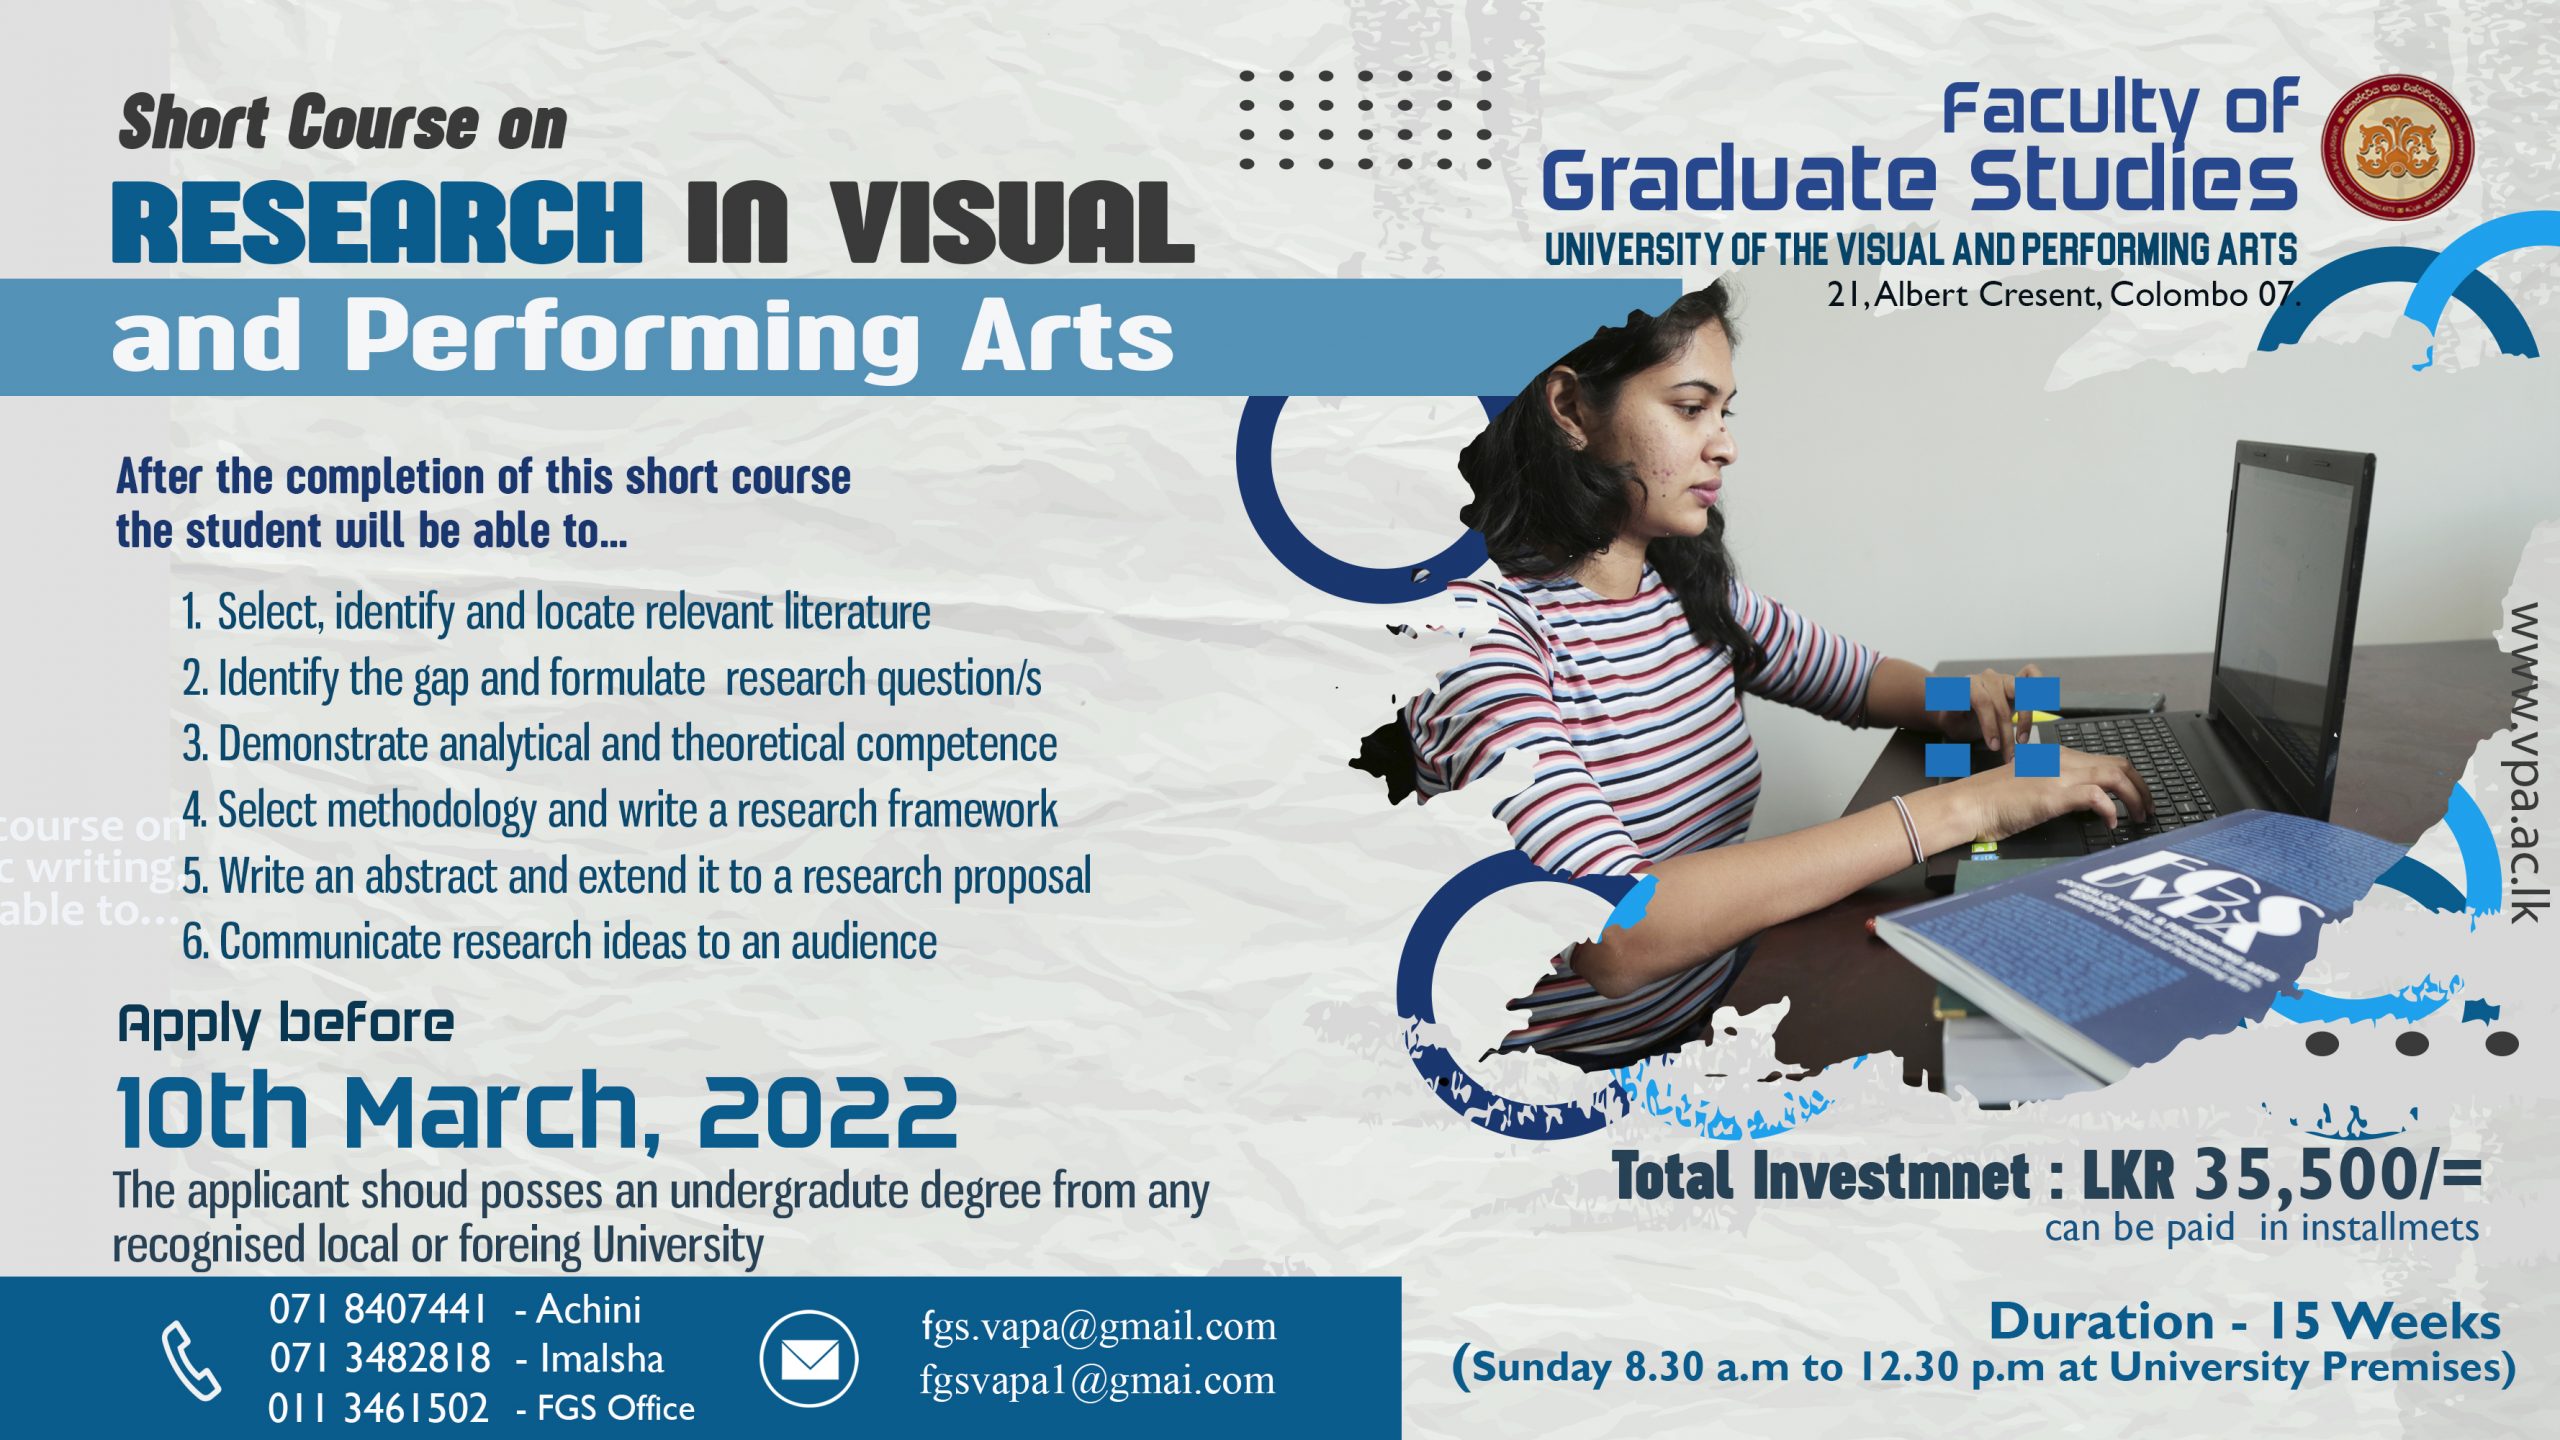 Short Course on Research in Visual and Performing Arts- FGS